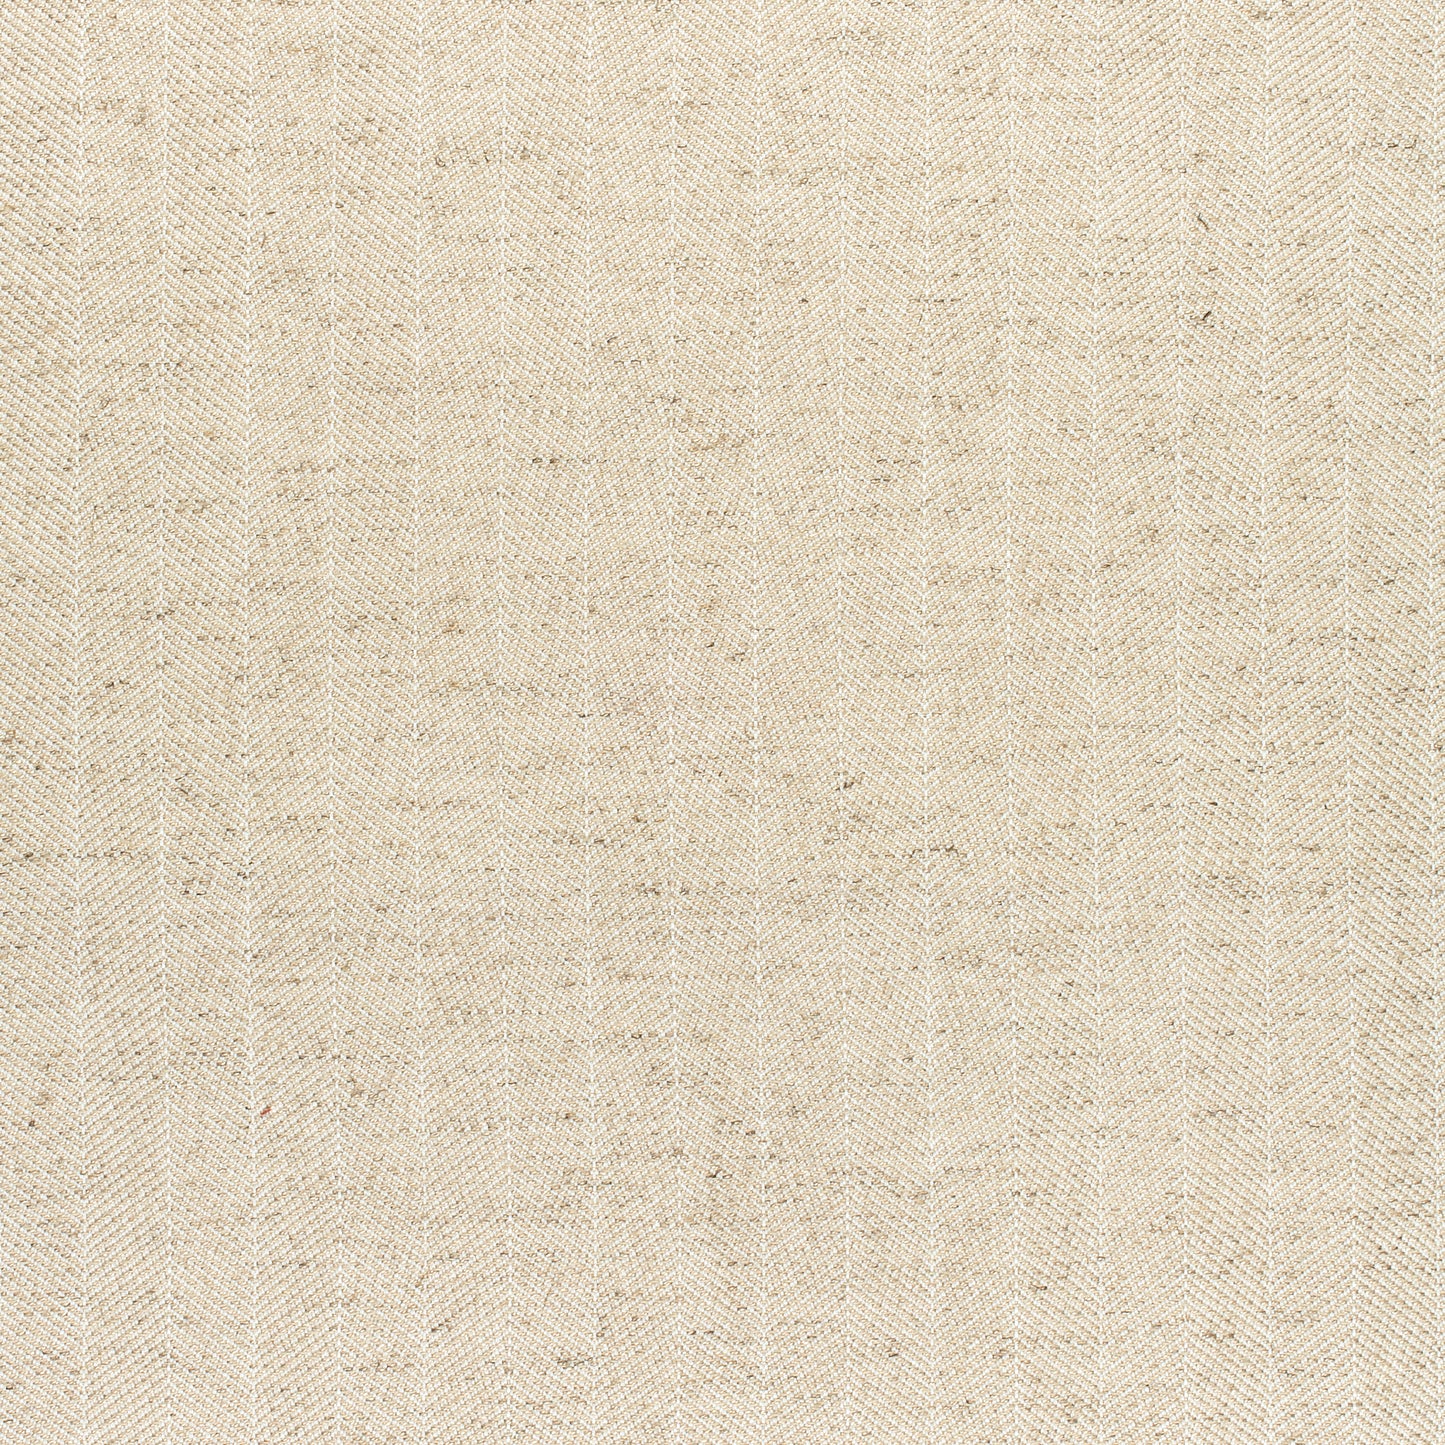 Purchase Thibaut Fabric Pattern number W80678 pattern name Hamilton Herringbone color Linen